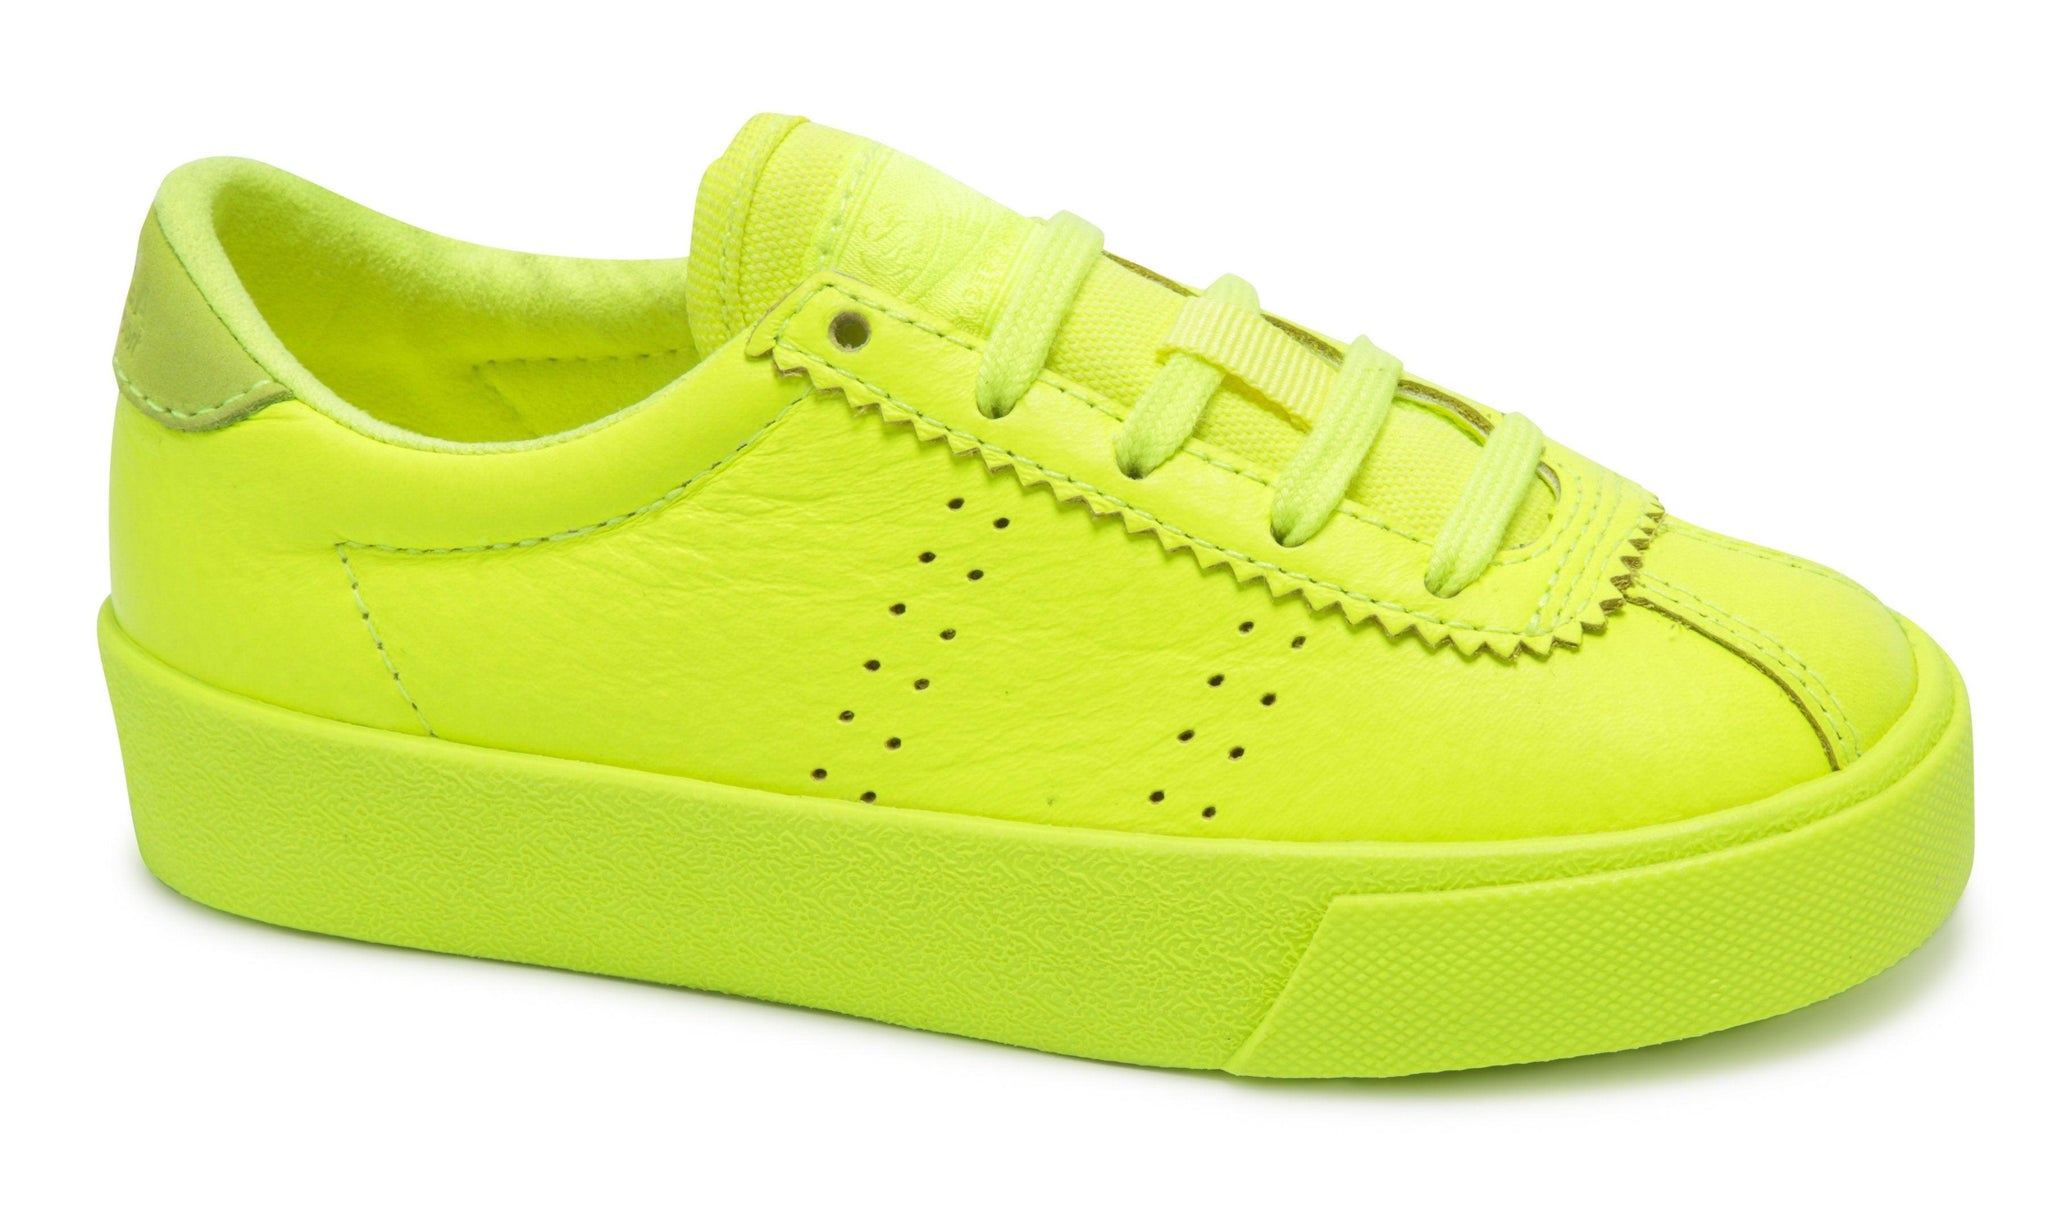 Superga 2843 Clubs Comfleau Total Yellow Fluo - Uncommon